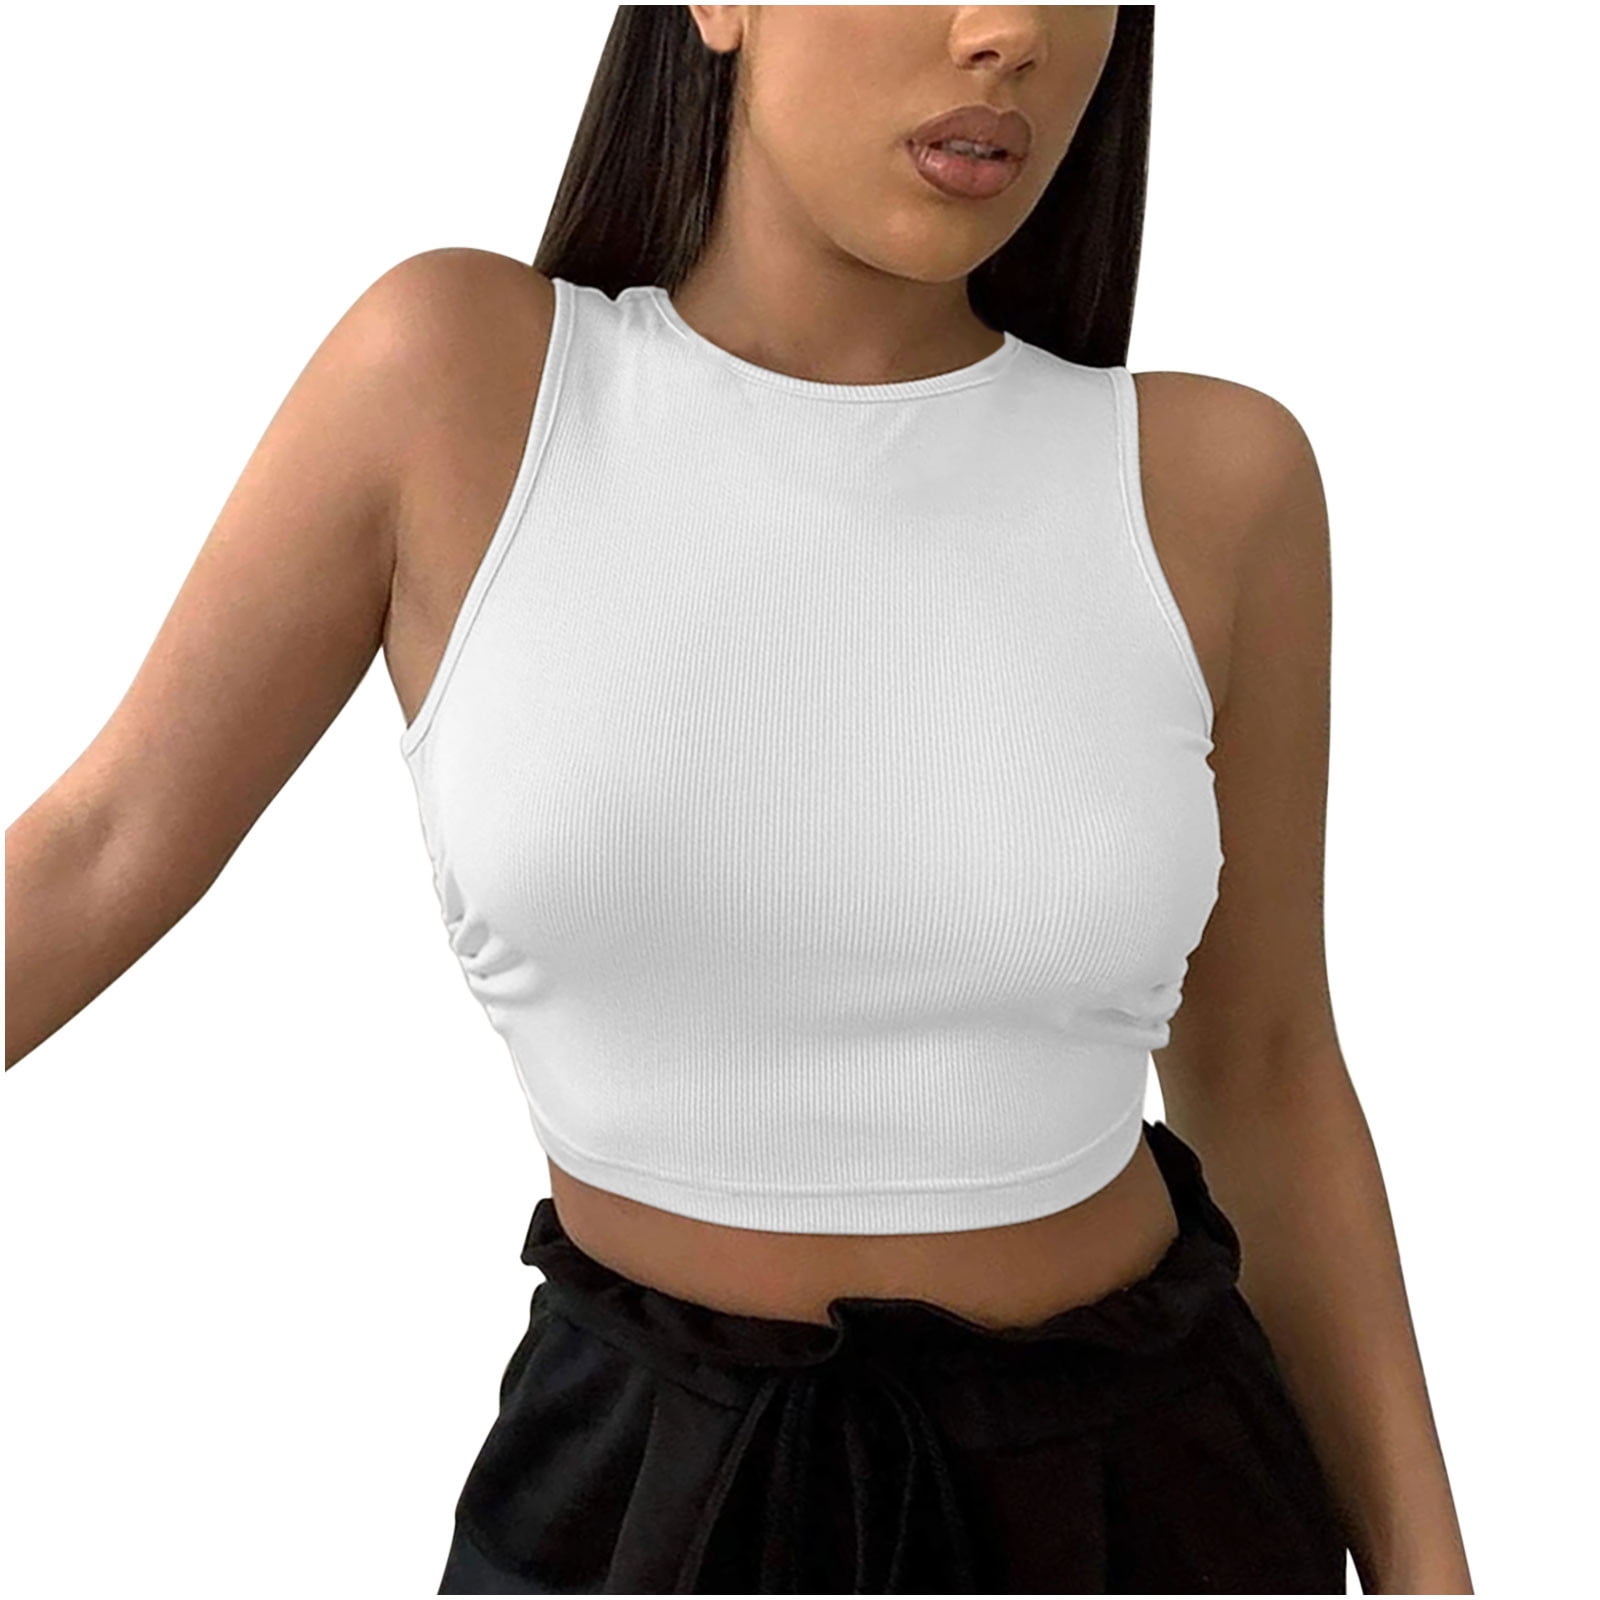 Yyeselk Women's Basic Short Sleeve Casual Cropped Tee Slim Fitted Round  Neck Crop Top Summer Blouse T-Shirt Tee Shirts White XXL